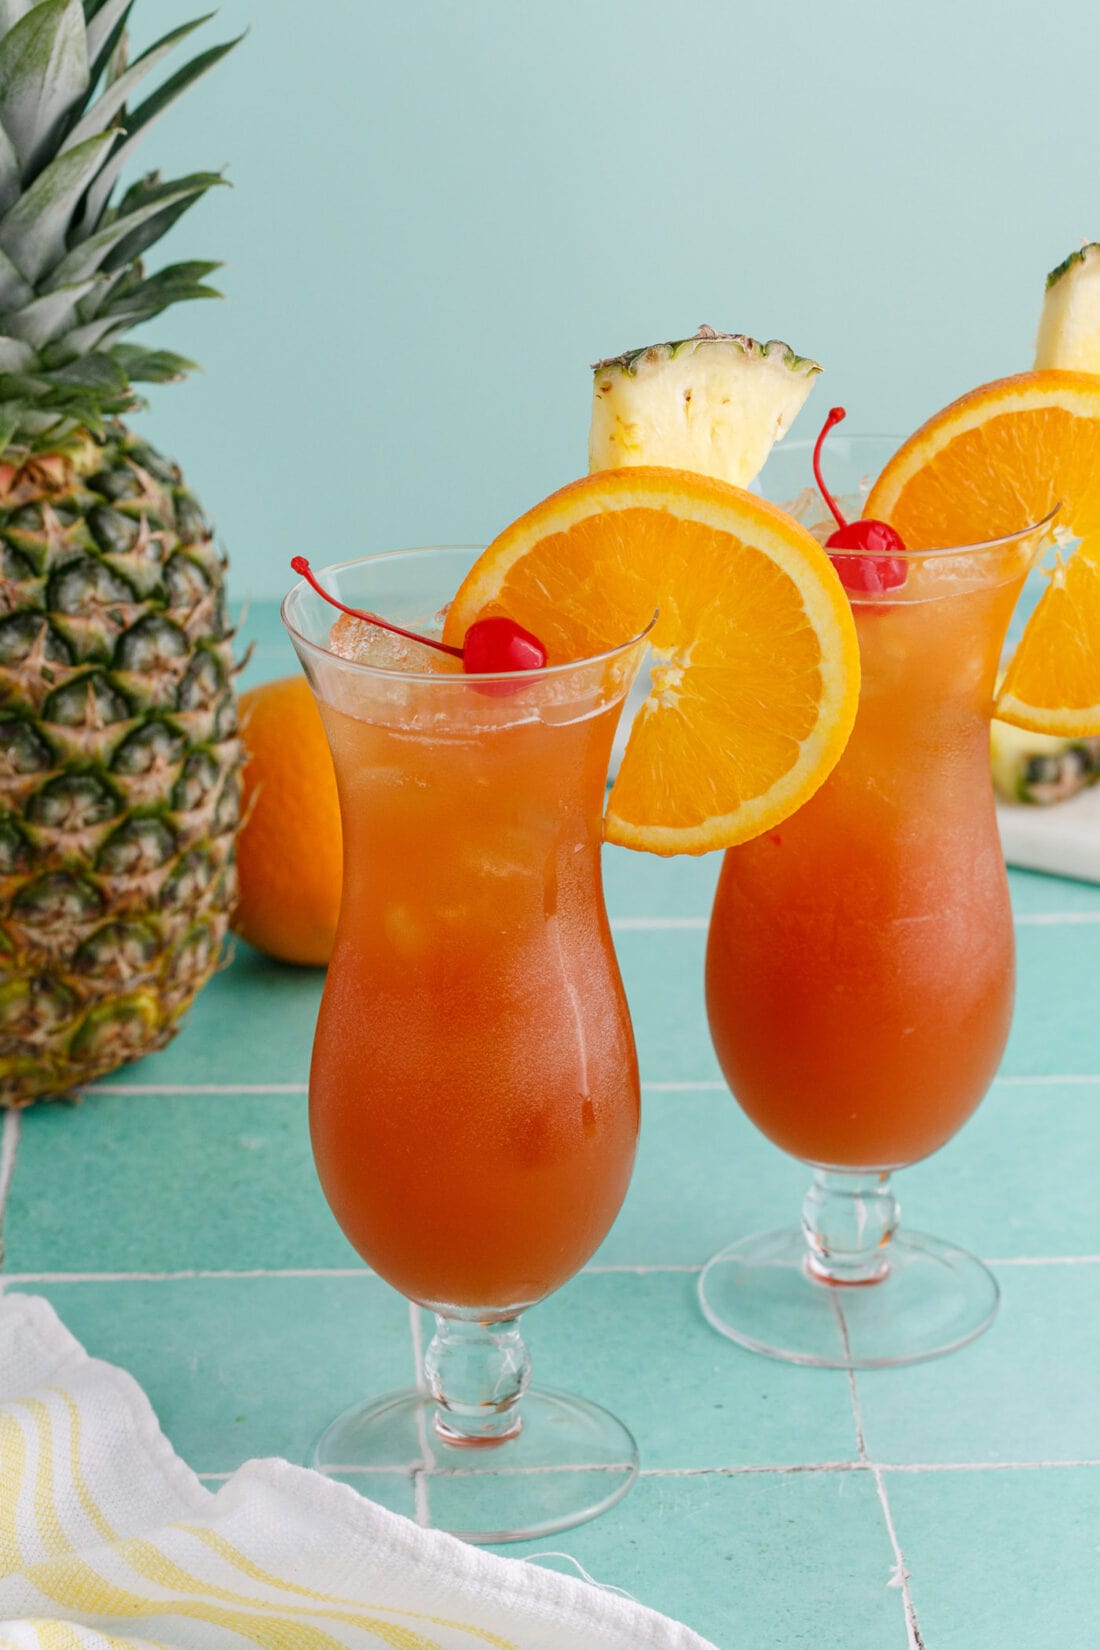 Two Rum Runners garnished with an orange wheel, pineapple wedge and cherry